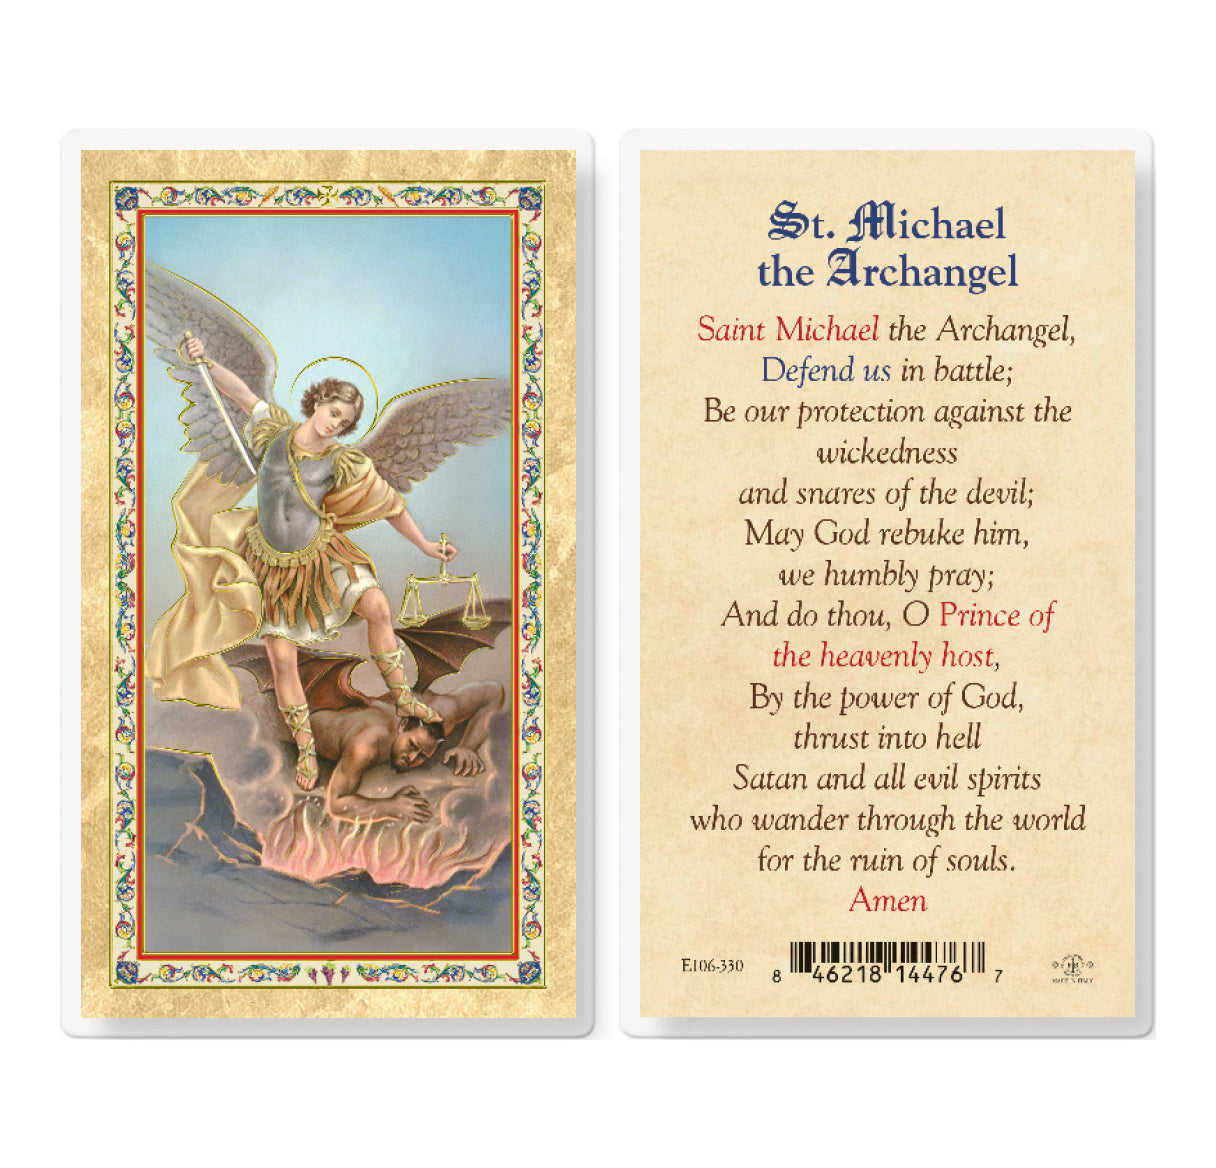 Prayer to St. Michael Gold-Stamped Laminated Catholic Prayer Holy Card with Prayer on Back, Pack of 25